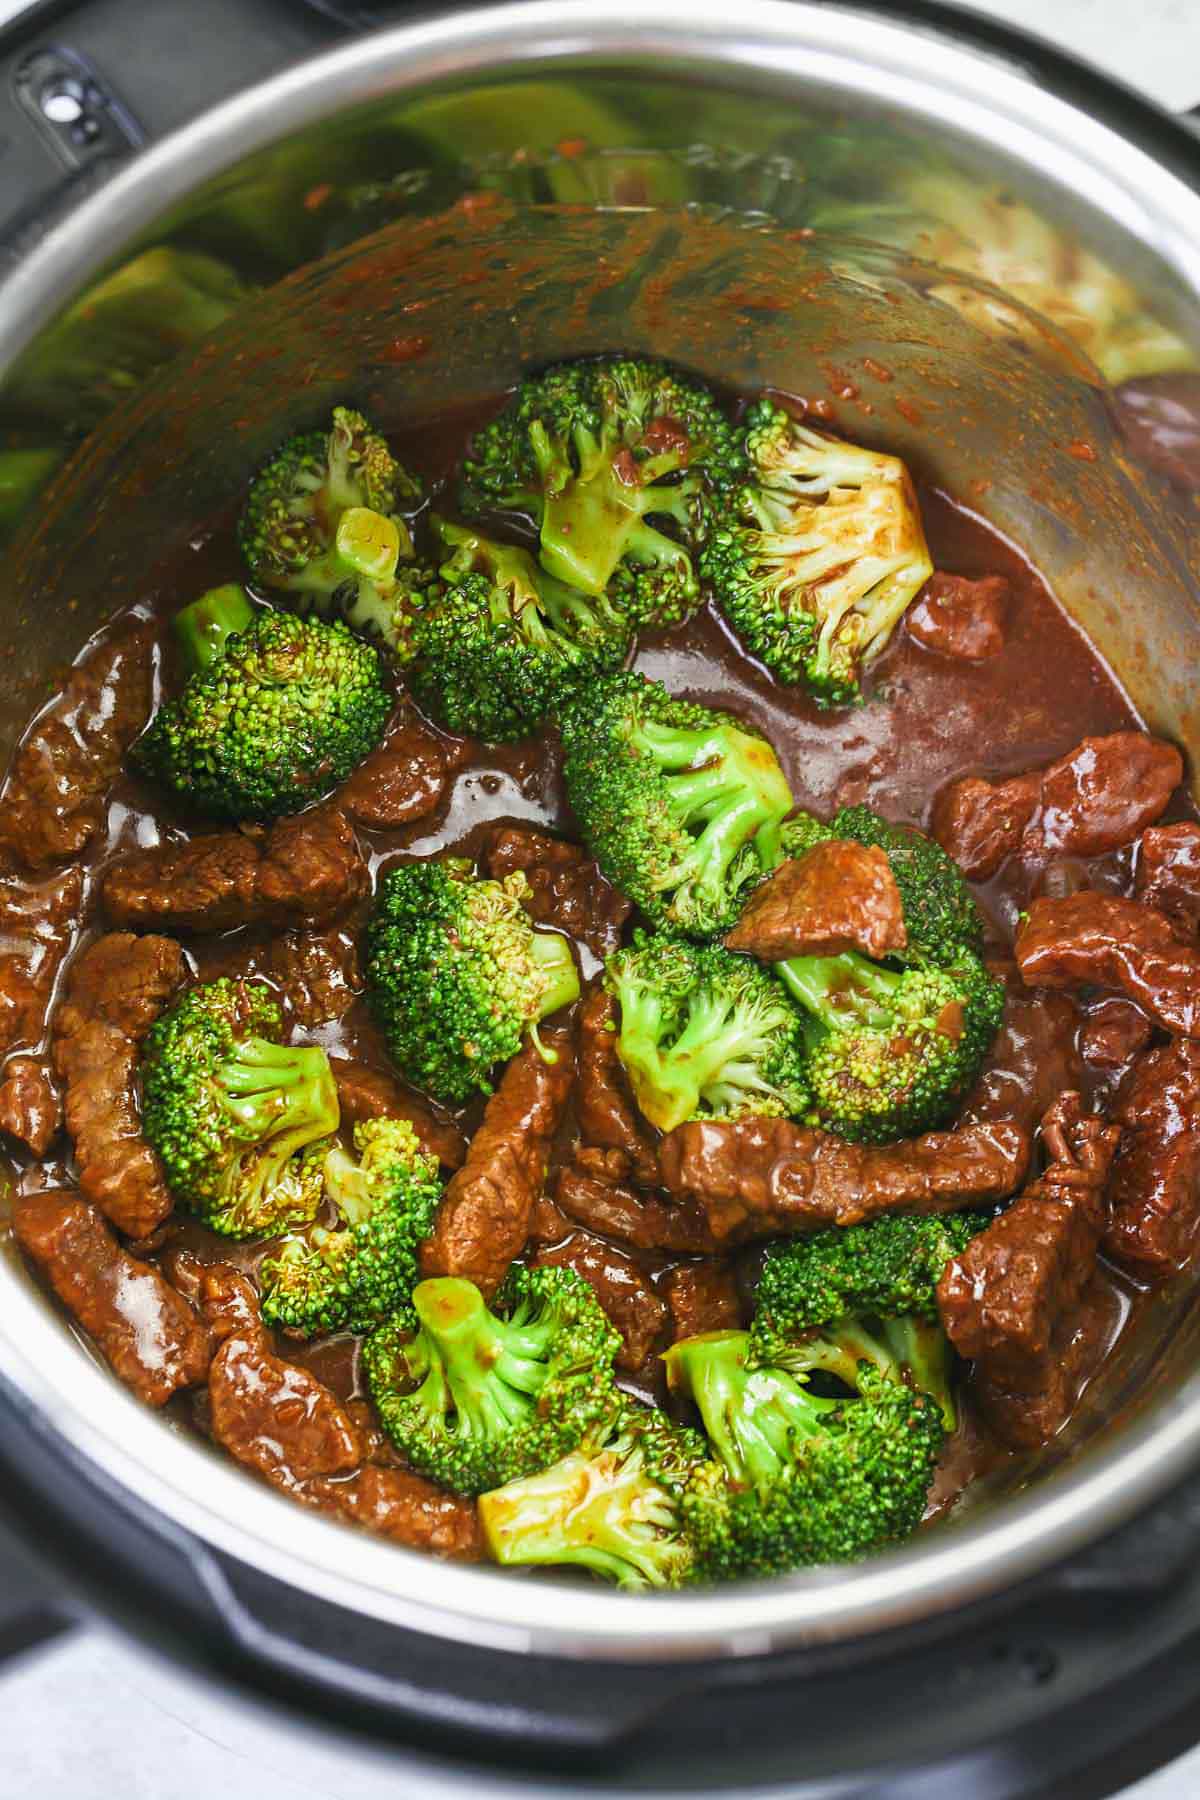 Beef and broccoli cooked in the Instant Pot